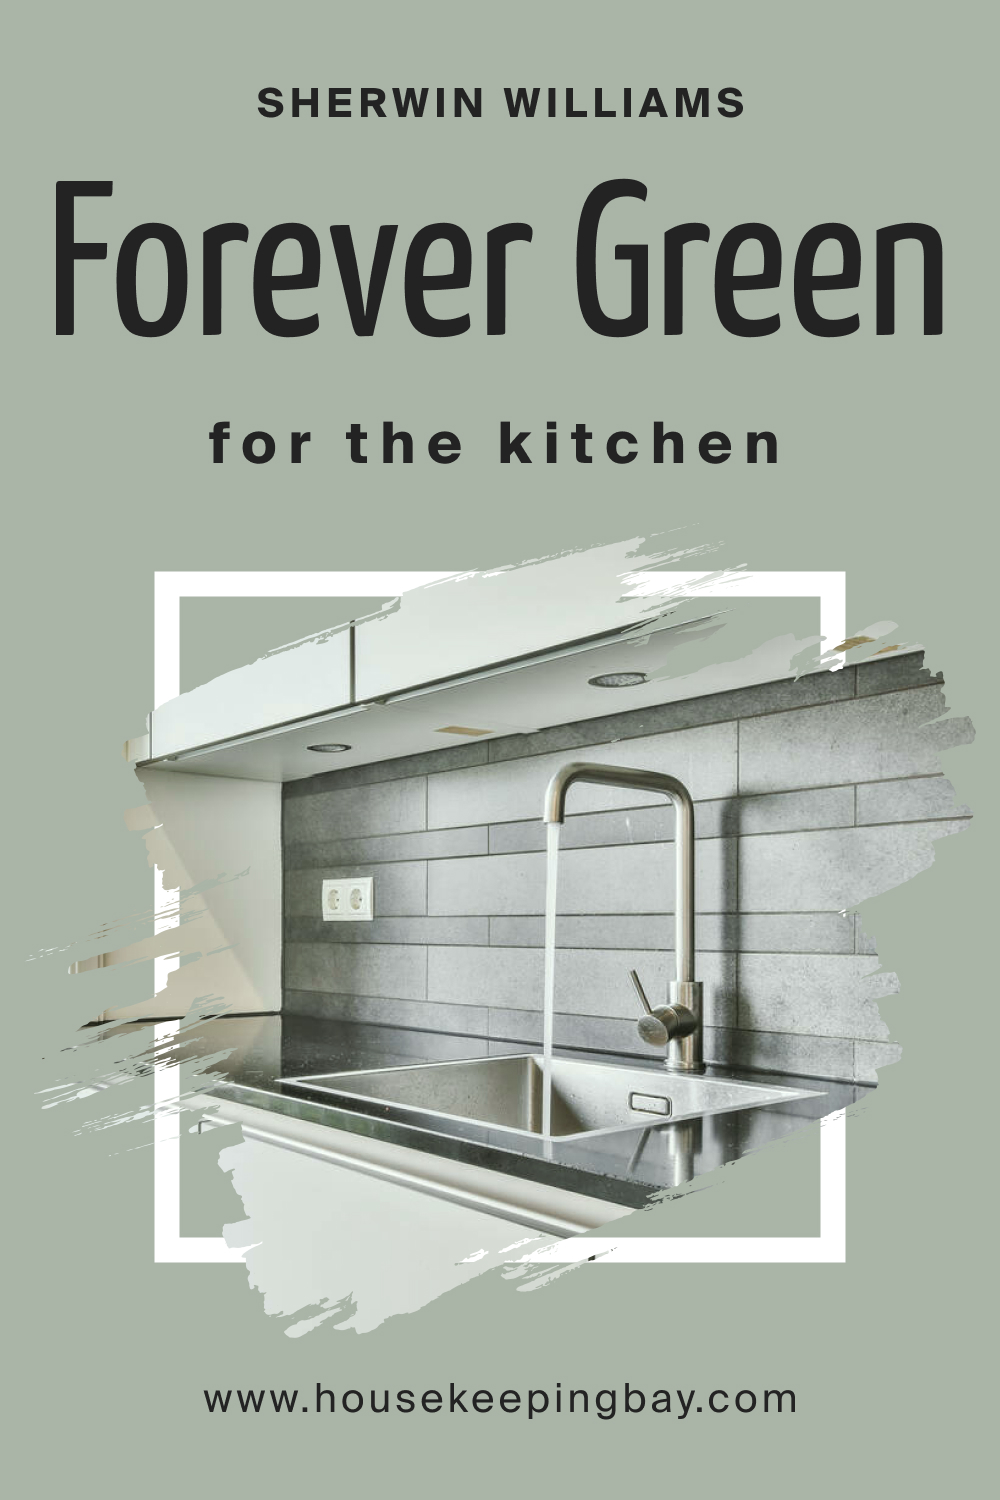 Sherwin Williams. SW 9653 Forever Green For the Kitchens